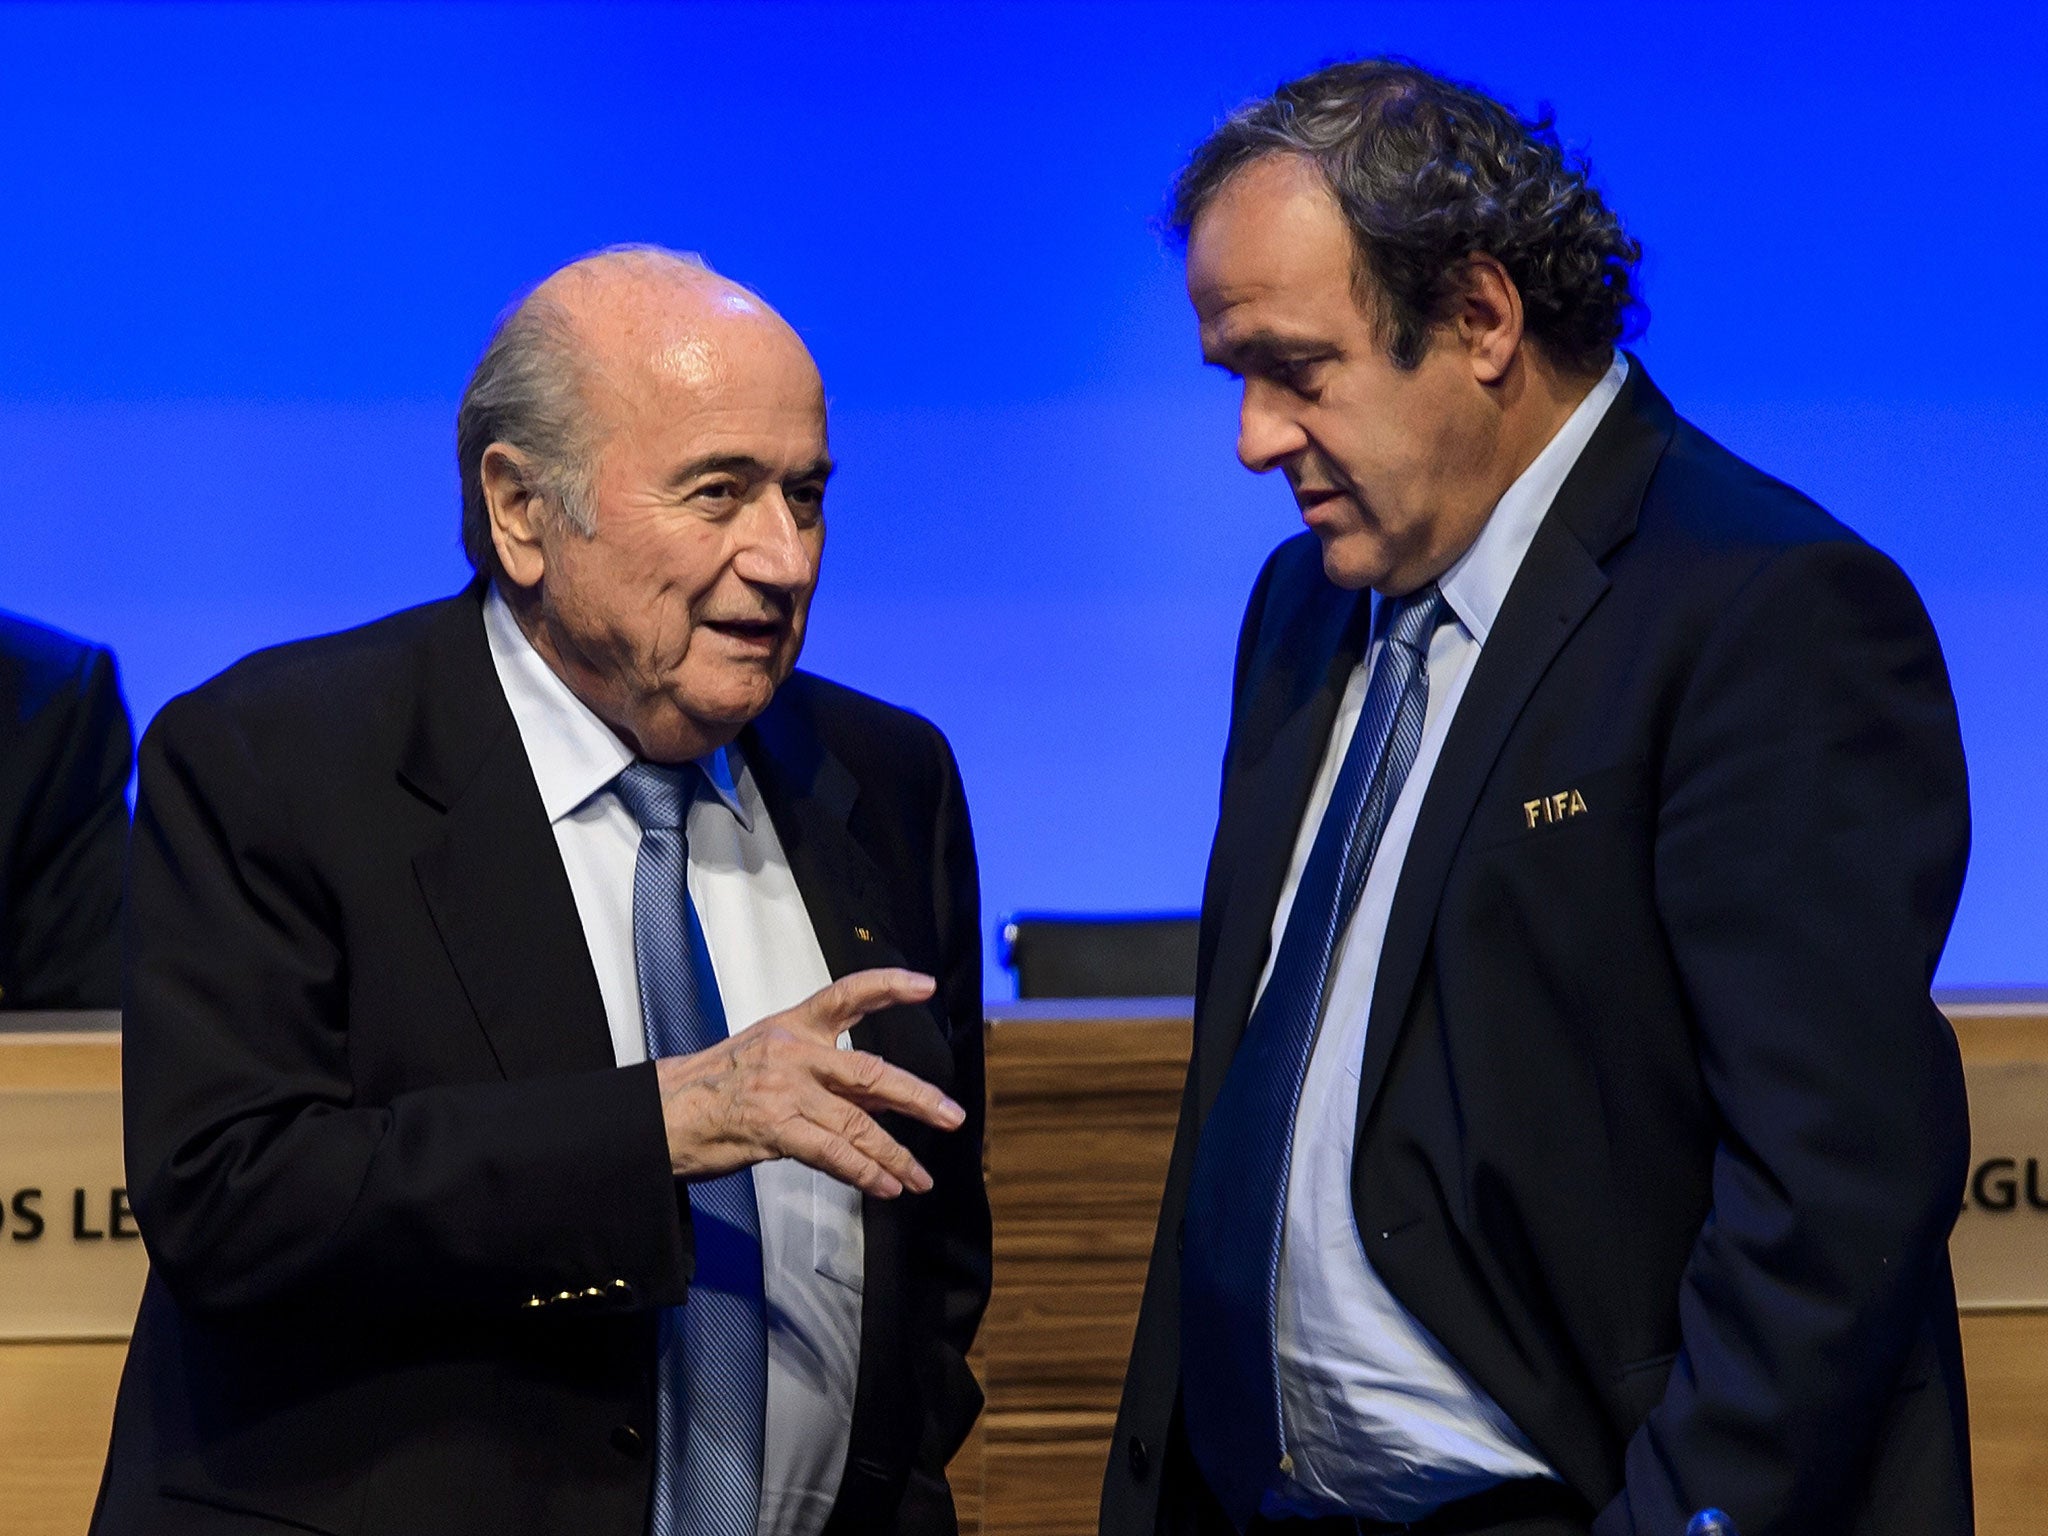 Michel Platini has ruled out opposing Sepp Blatter for Fifa’s top job